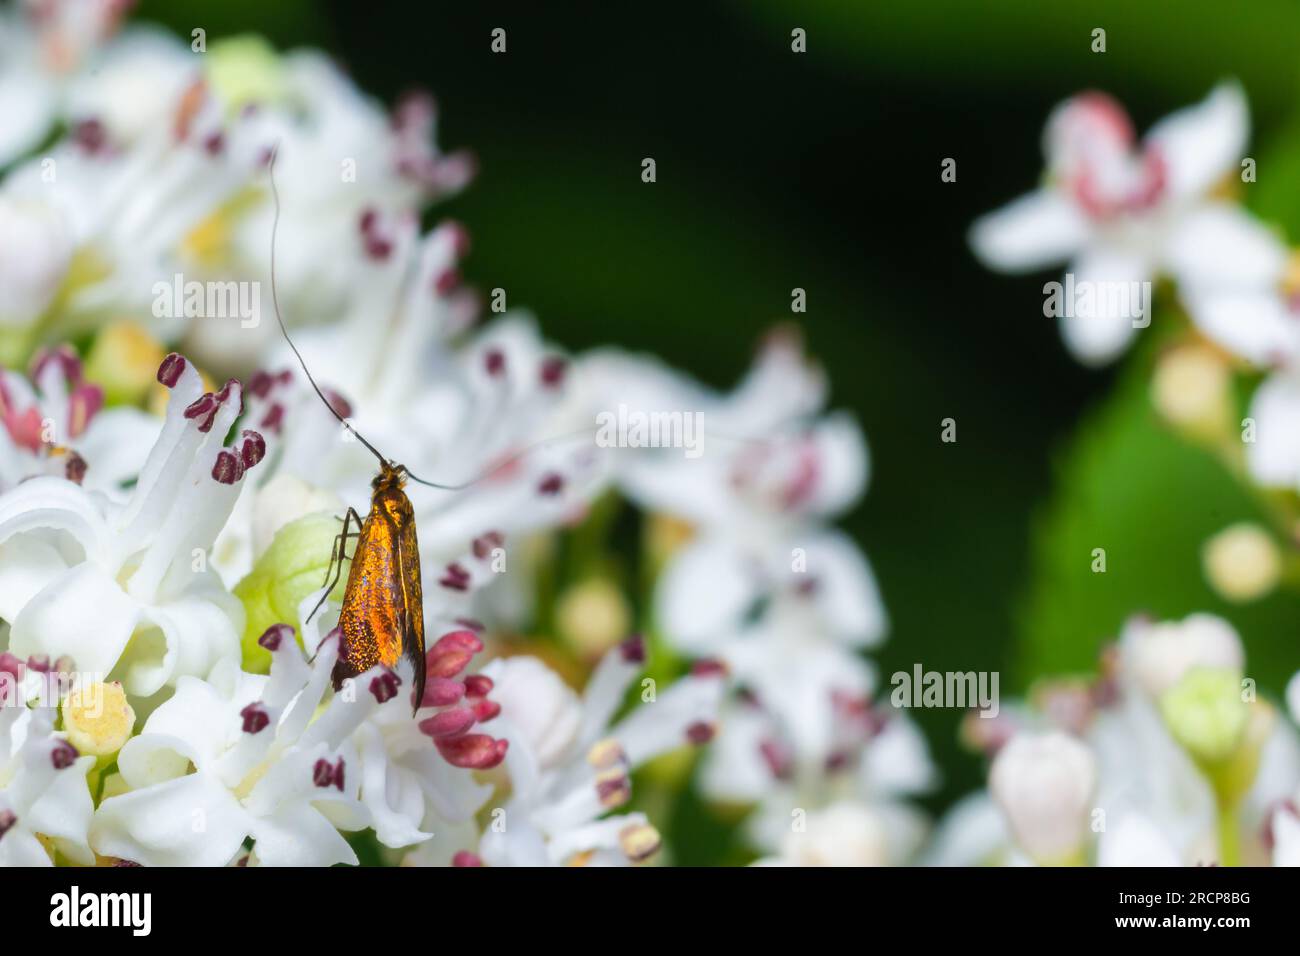 Close-up image of a long-legged butterfly, Nemophora degeerella on white flowers. Stock Photo